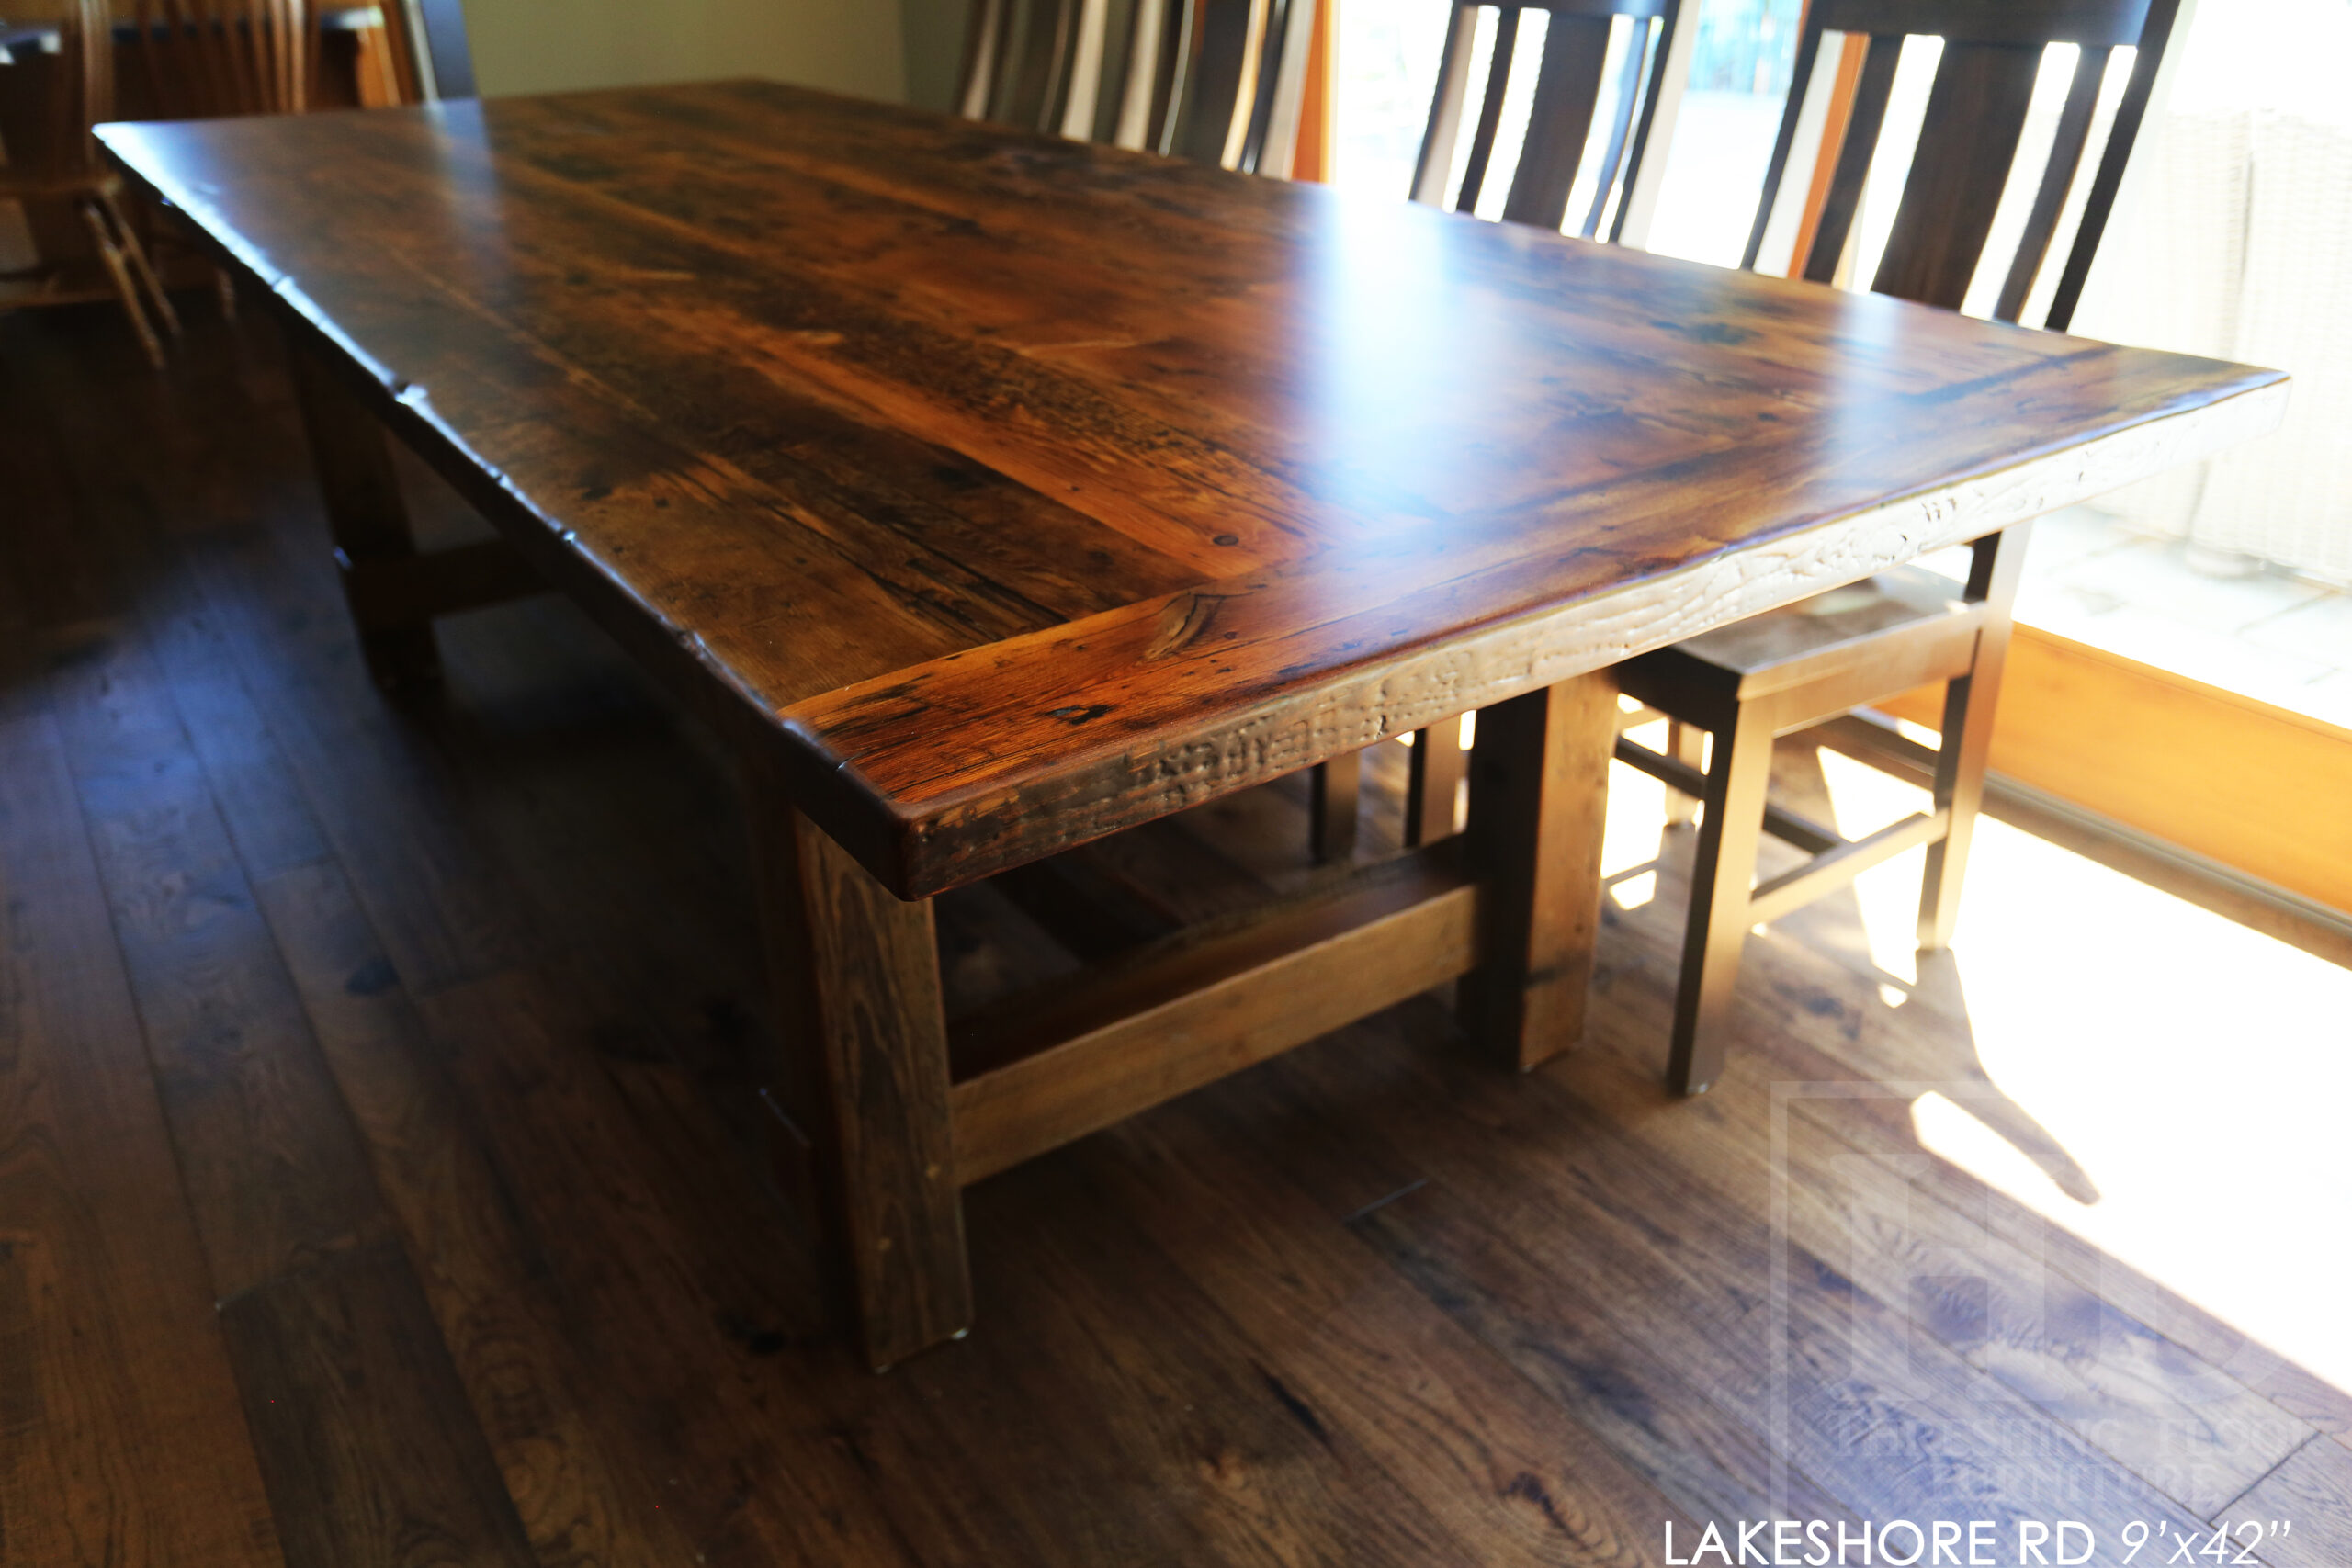 Project Summary: 9’ Reclaimed Ontario Barnwood Frame Table we made for a St. Catherines, Ontario Home – 42” wide - Old Growth Hemlock Threshing Floor Construction - Original edges & distressing maintained – Bread Edge Boards - Premium epoxy + matte polyurethane finish – 10 Sorority Chairs / Wormy Maple / Stained Dominant Tone of Table / Polyurethane Clearcoat Finish - www.table.ca